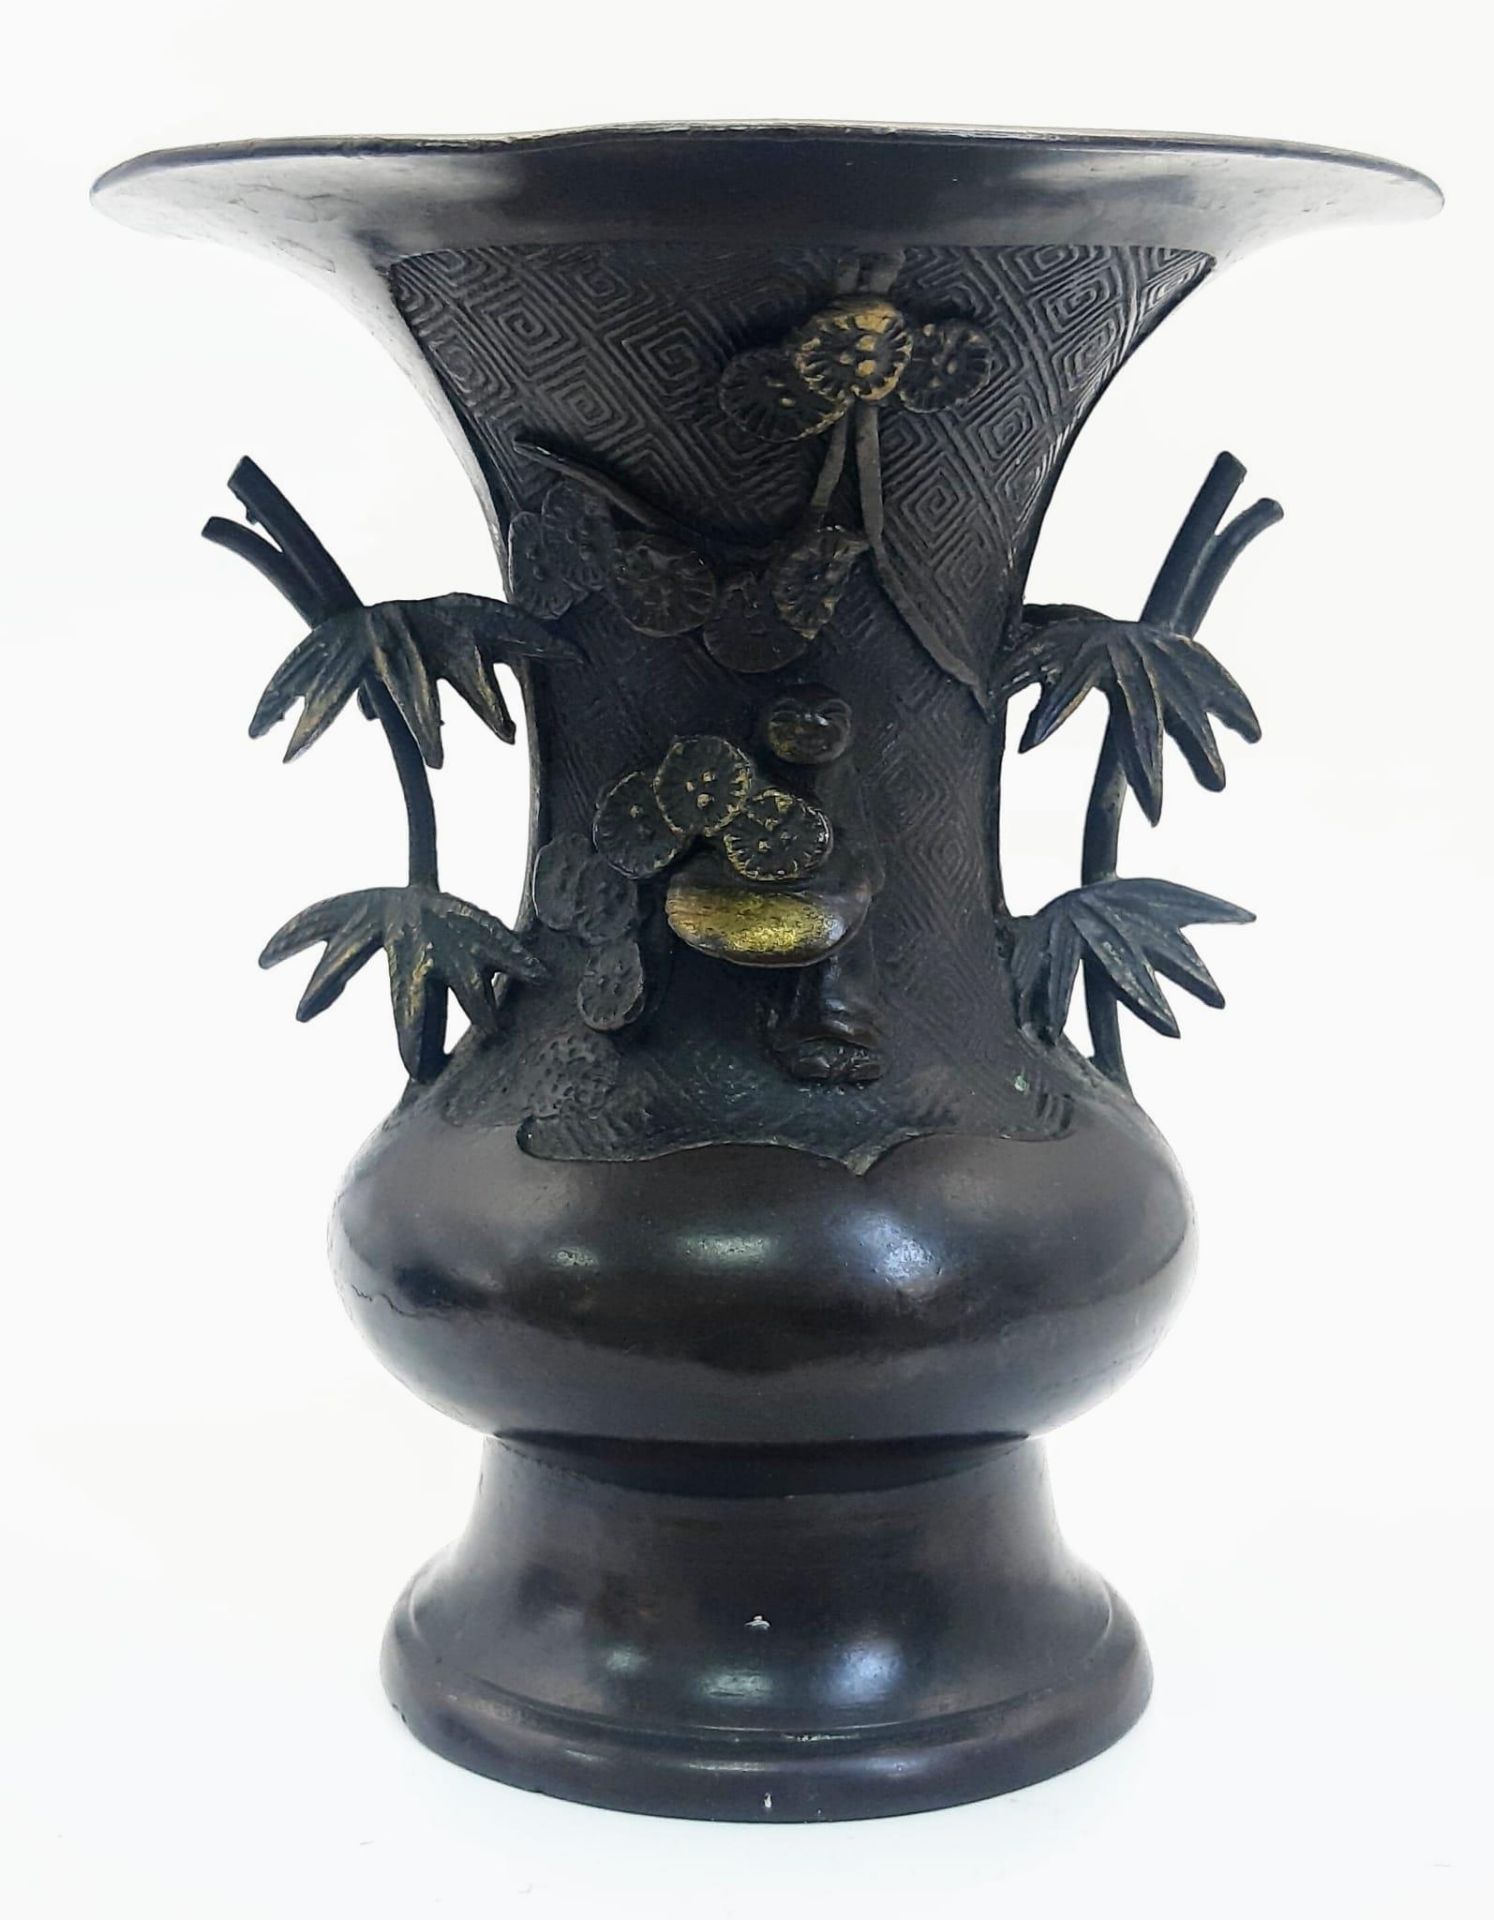 A Rare Antique 17th Century Chinese Ming Dynasty Small Bronze Altar Vase. Two ornate branch